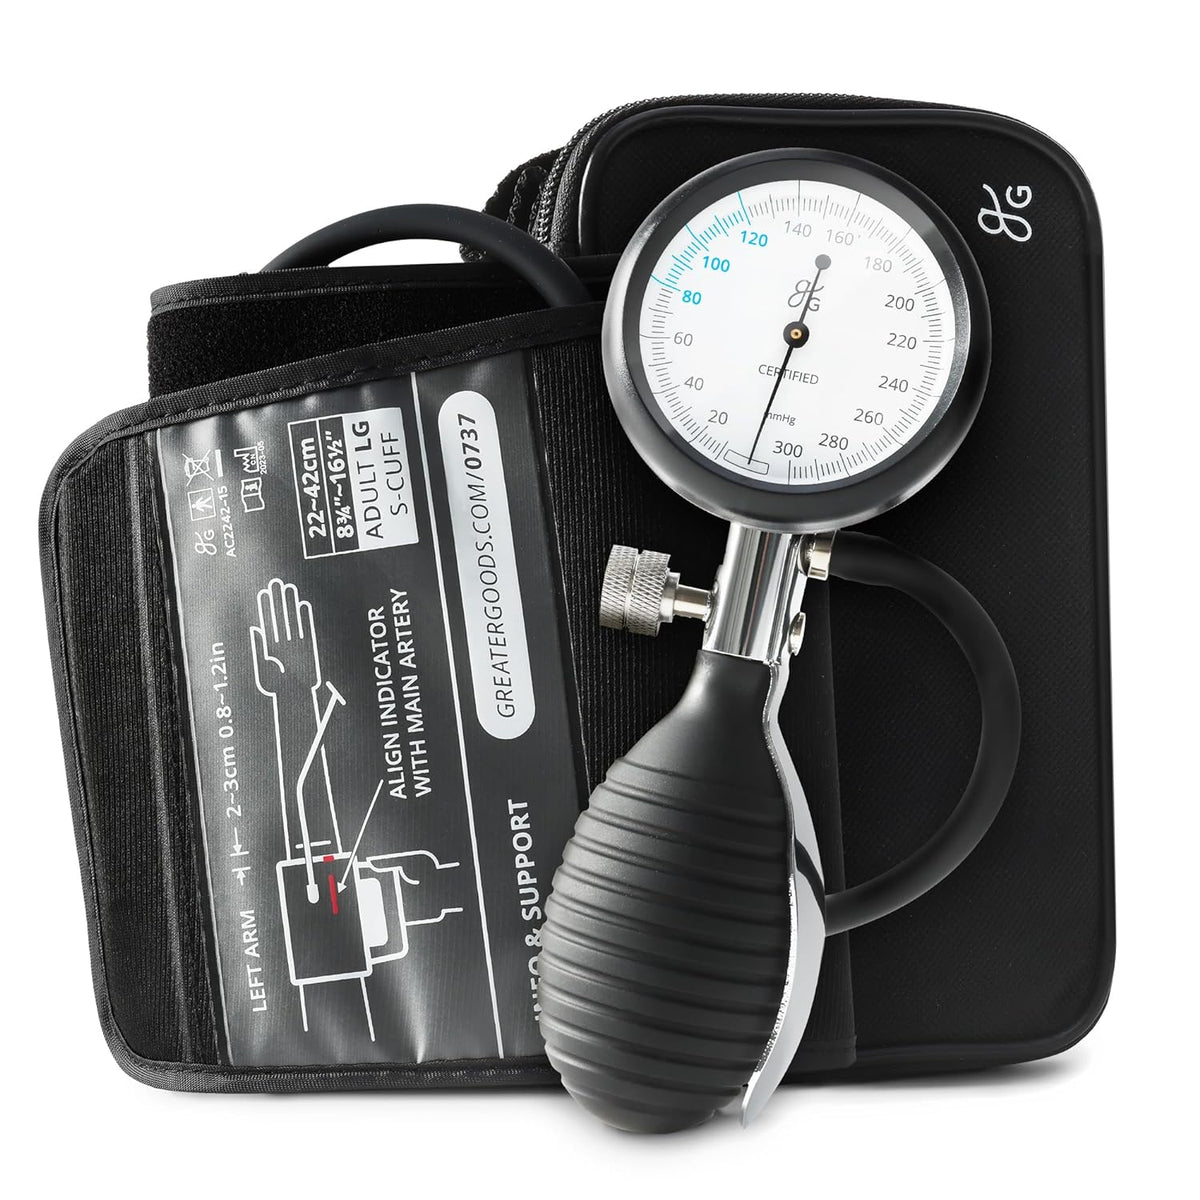 Greater Goods Premium Stethoscope and All-in-One Sphygmomanometer Bundle